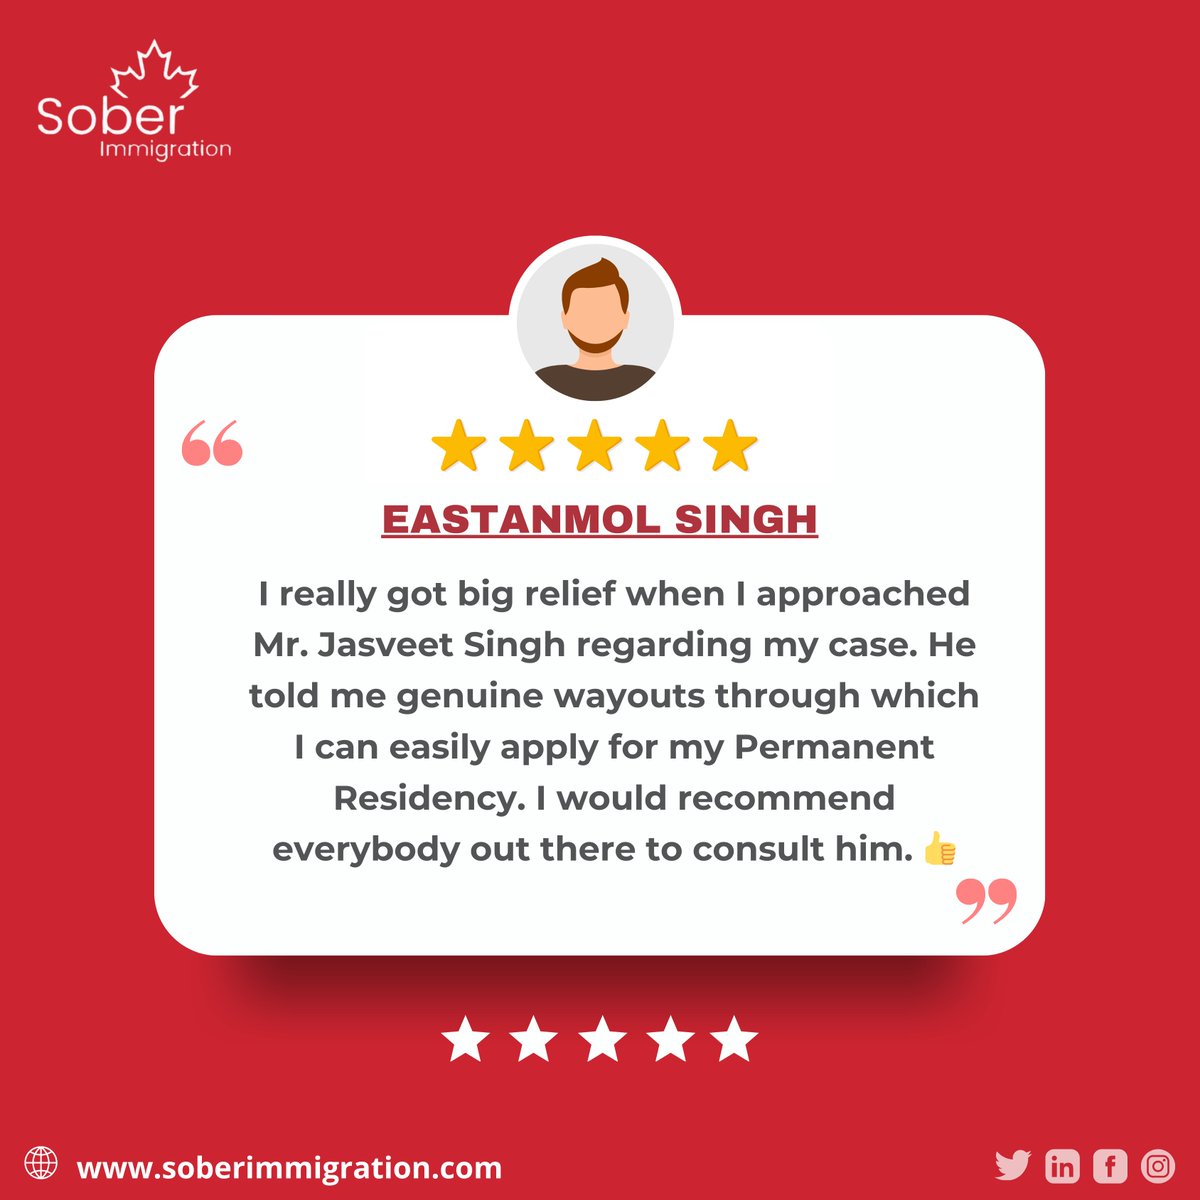 Thank you for trusting us with your immigration journey! #ClientSatisfaction #ImmigrationSuccess #HappyClient #PositiveFeedback #ClientReview #Grateful #ExcellentService #ImmigrationExperts #SatisfiedCustomer #CustomerExperience #ThankYou #SuccessStory #ClientTestimonial